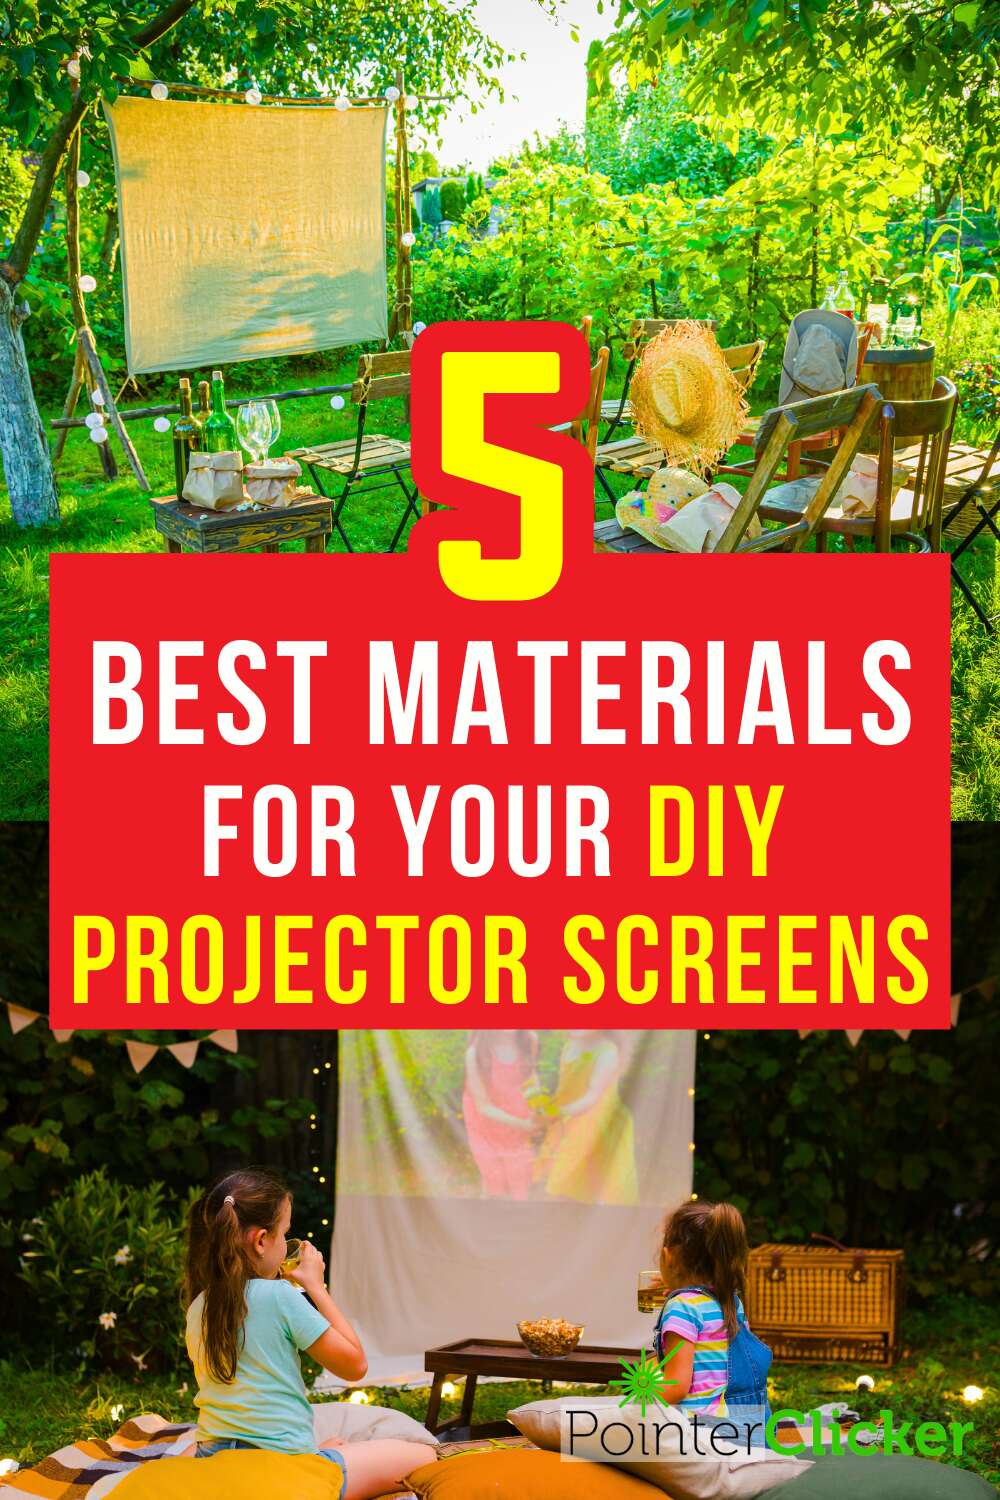 The image above is a projector movie night set up. the image below contains two girls watching movie on a DIY projector screen. The words say '5 best materials for your diy projector screens'